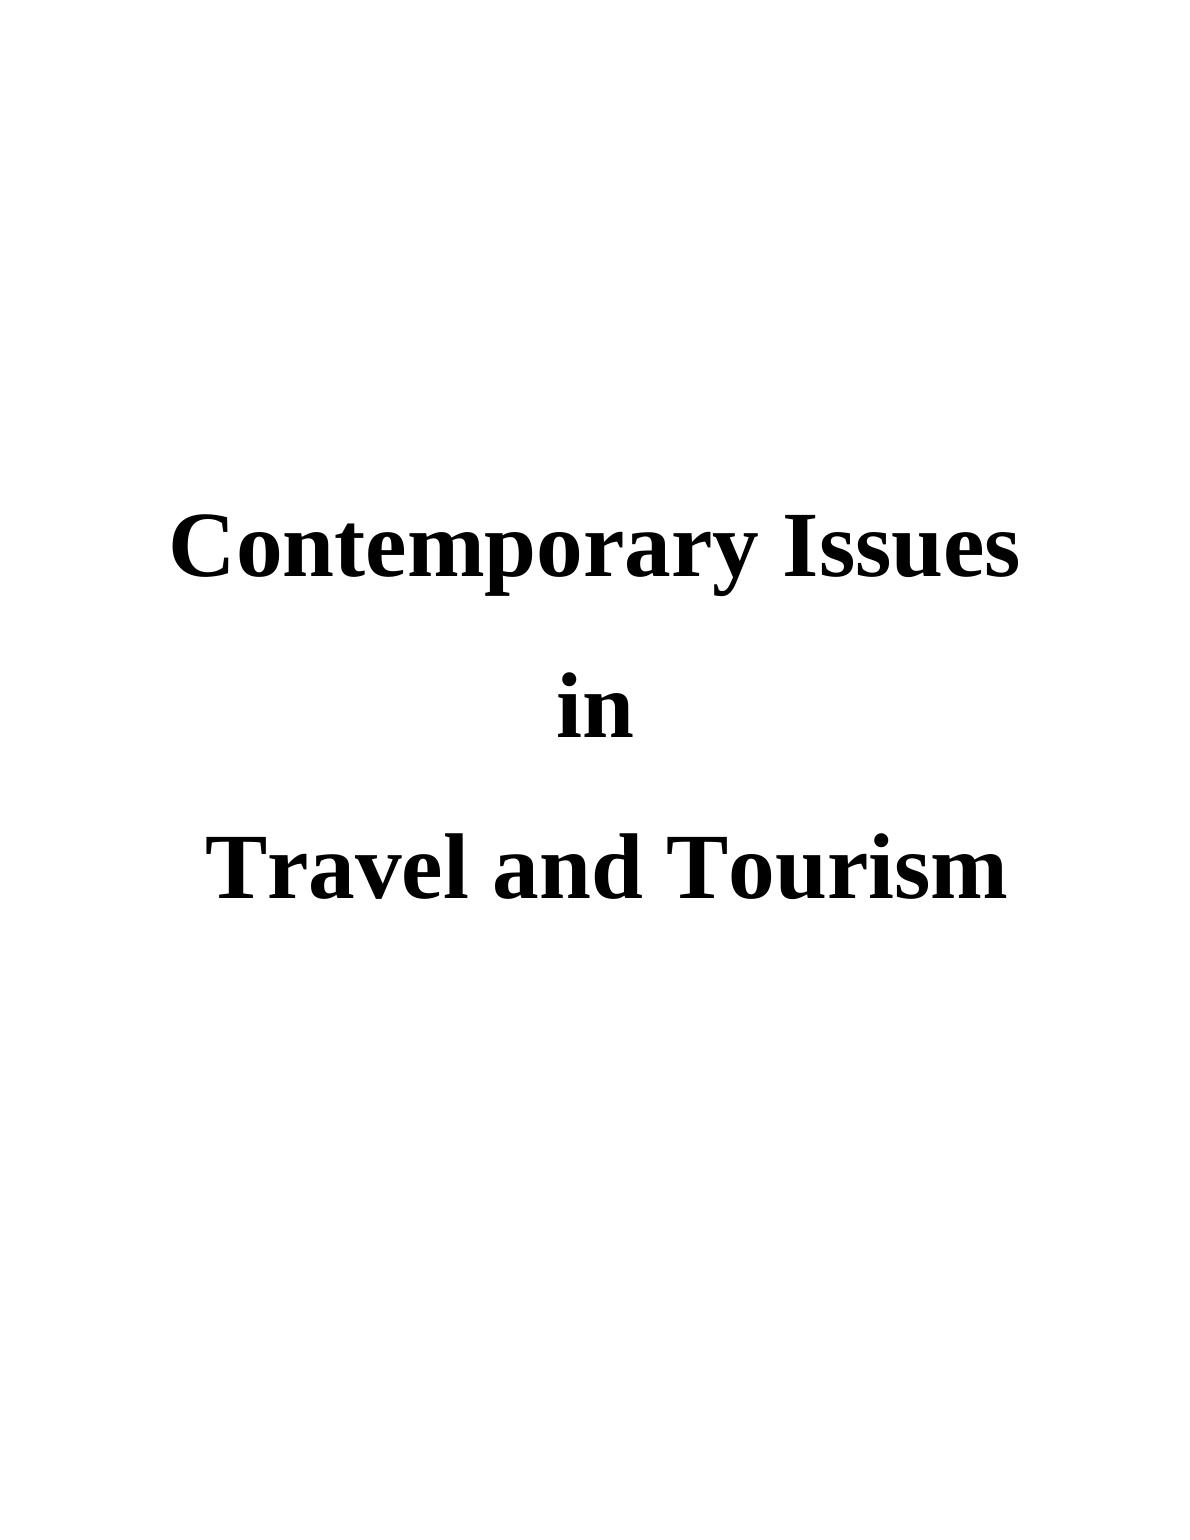 Contemporary Issues in Travel and Tourism Sector : Report_1